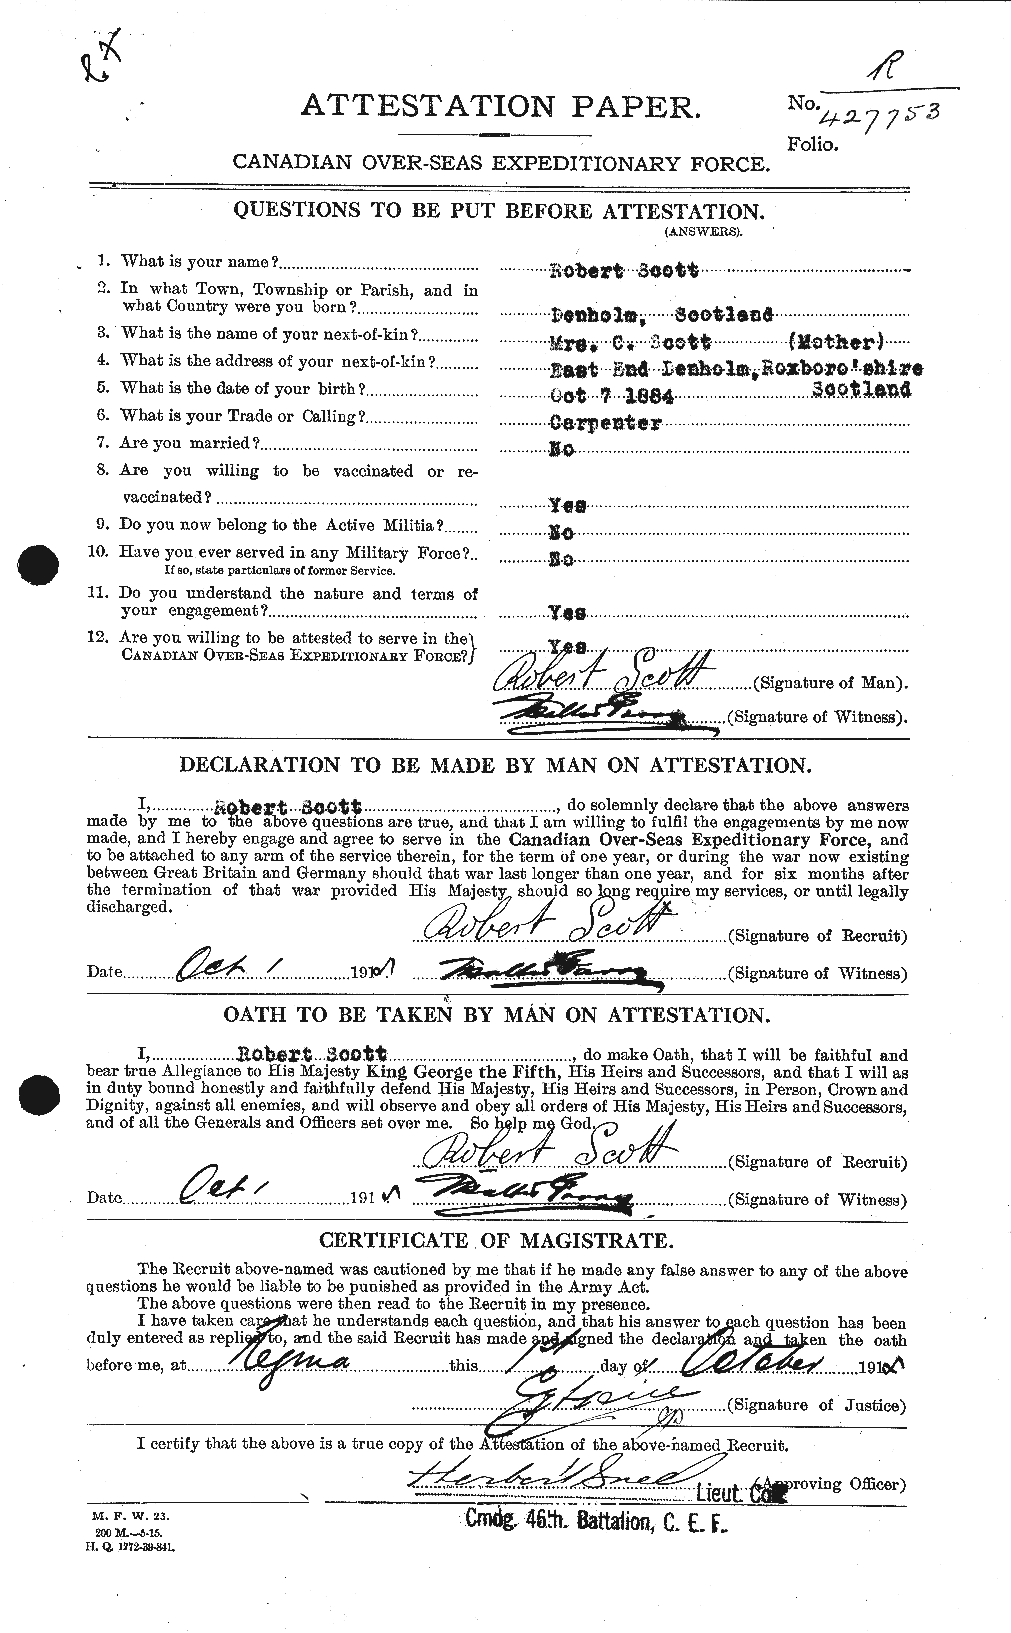 Personnel Records of the First World War - CEF 089234a